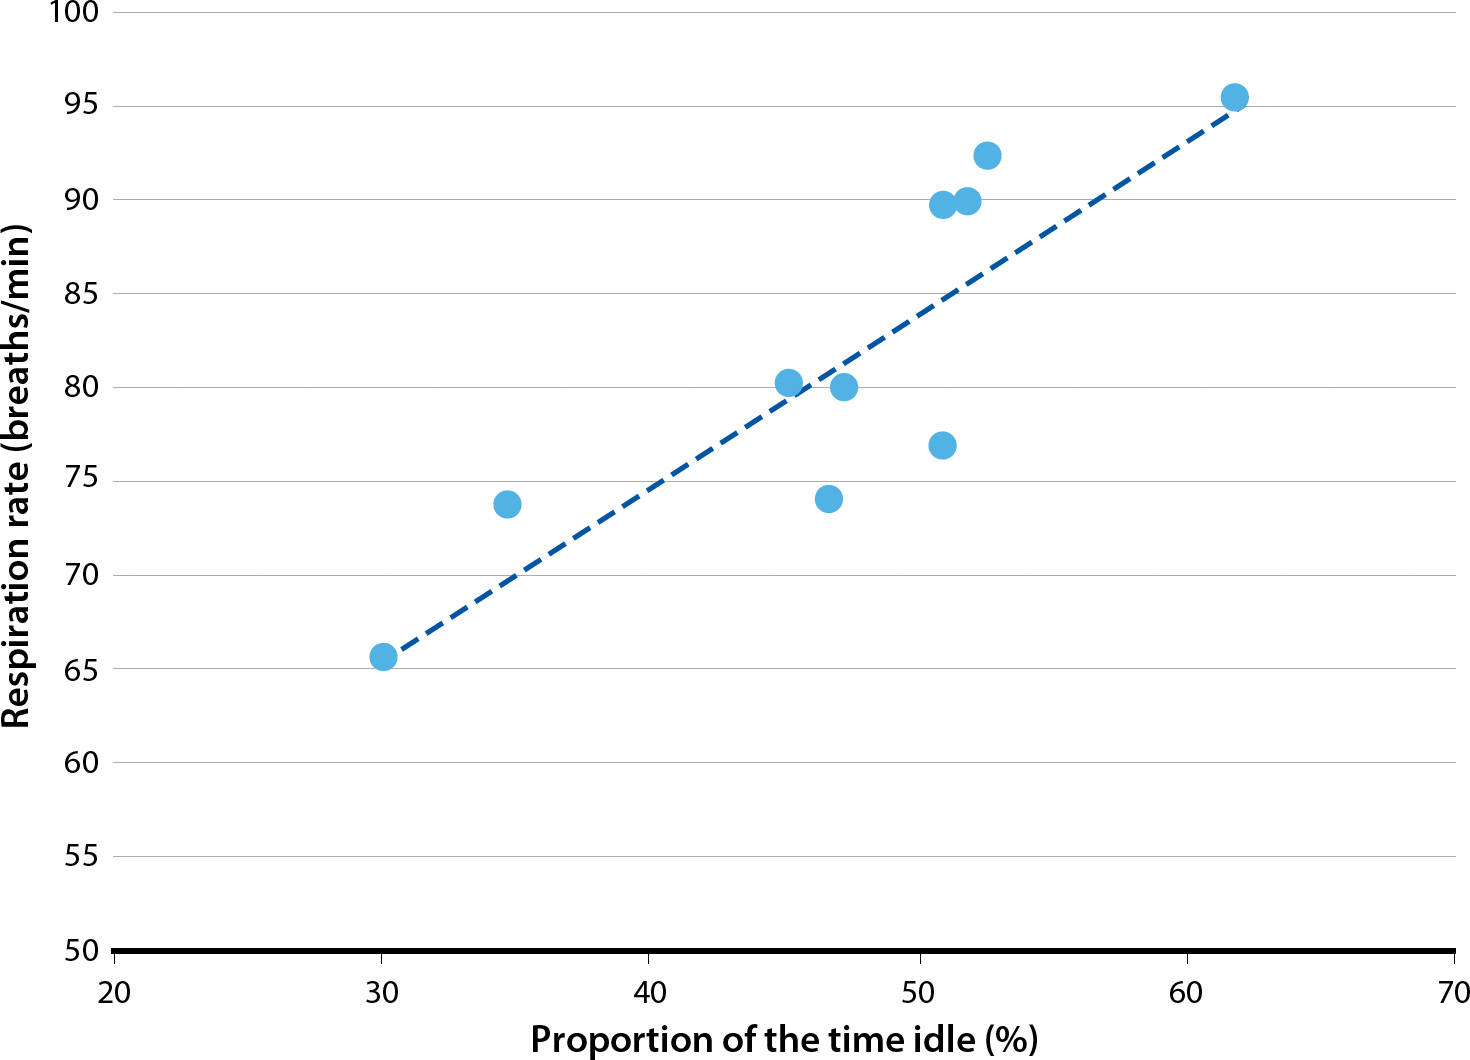 Relationship between respiration rates and proportion of the time focal cows were idling (i.e., not engaged in any activity) on 10 California drylot dairies (average over 3 days of observation). R2 = 0.75; P < 0.01.